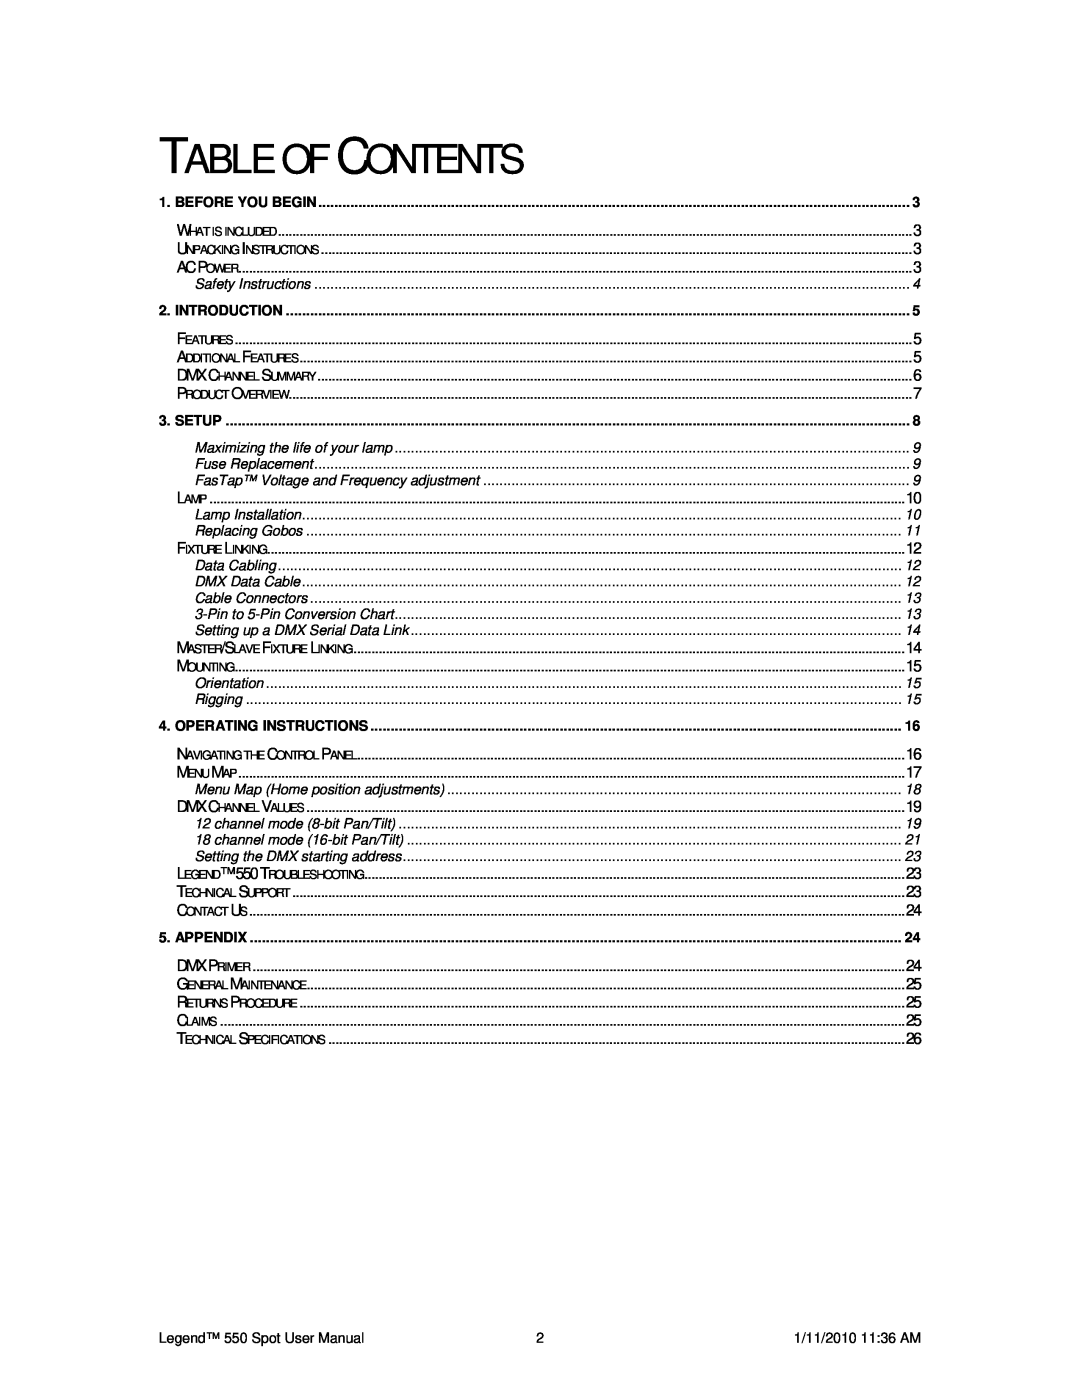 Chauvet 550 user manual Table Of Contents, Before You Begin, Introduction, Setup, Operating Instructions, Appendix 